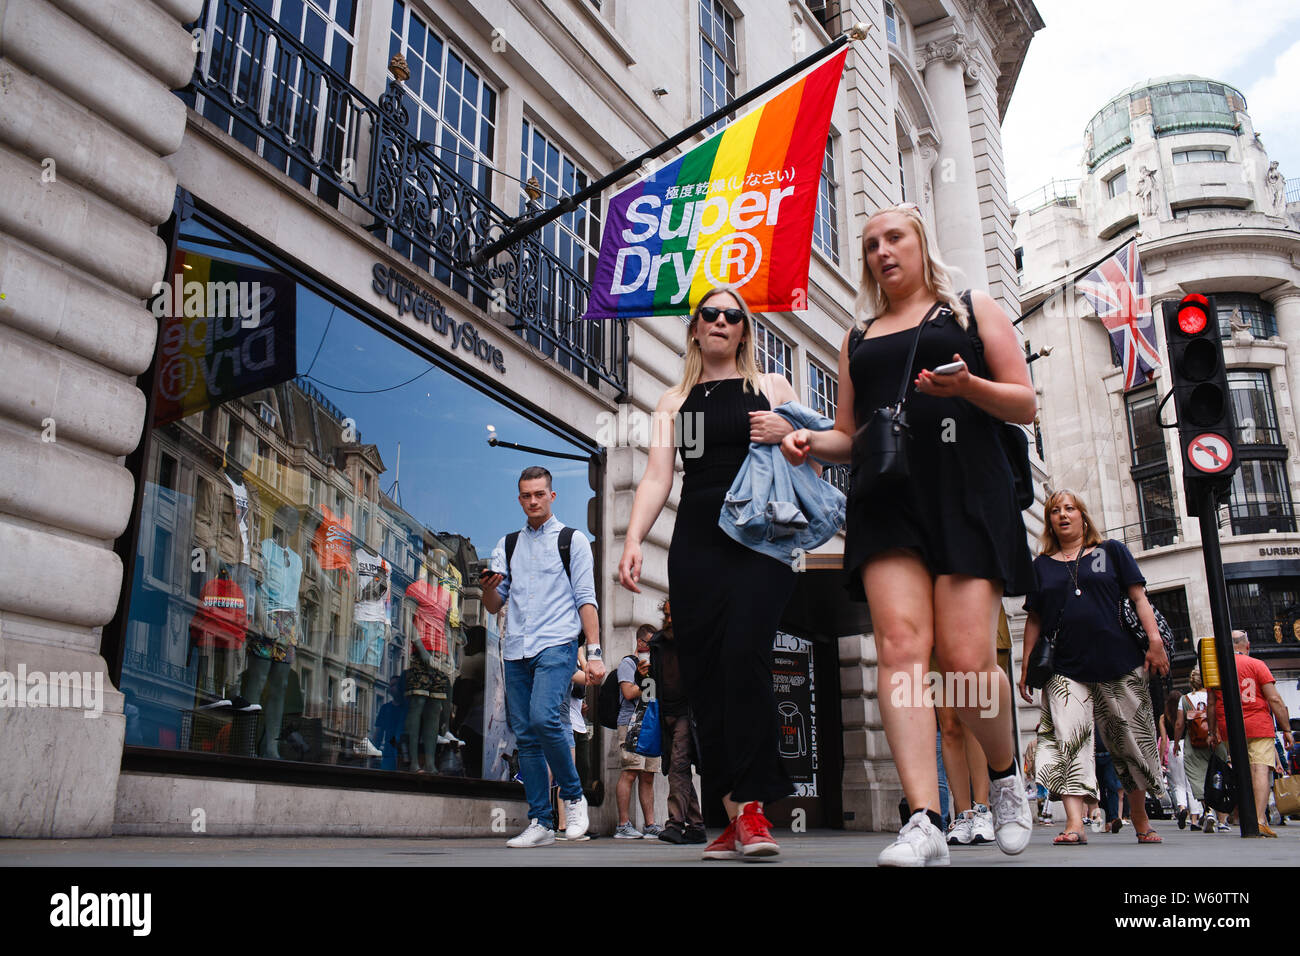 July 5, 2019, London, United Kingdom: Shoppers walk past a Pride-themed,  rainbow-coloured flag on display outside the flagship branch of clothing  retailer Superdry on Regent Street in central London.This year marks the